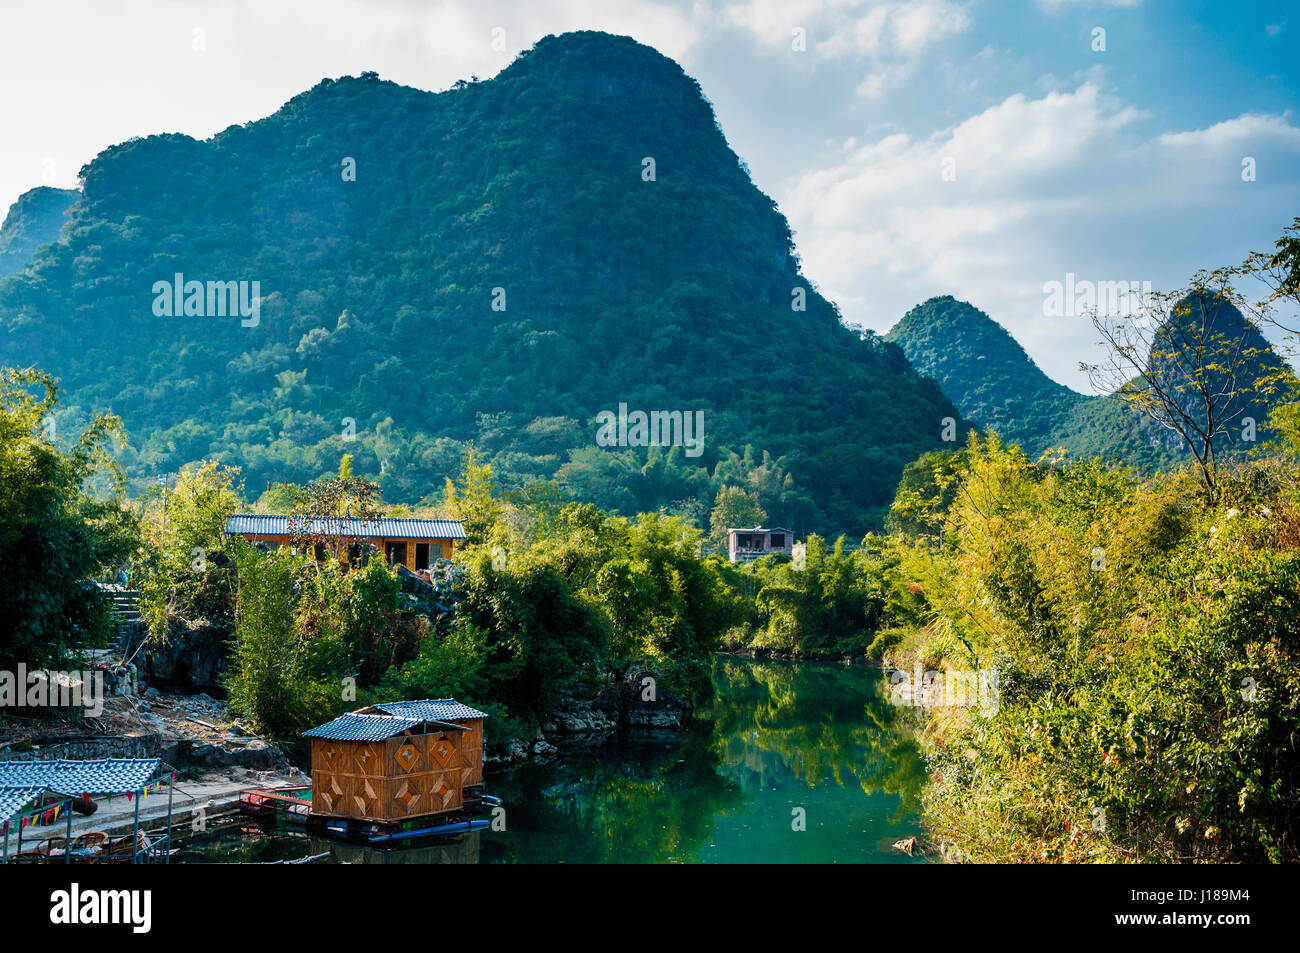 Beautiful river scenery with mountain background in Guilin, China. Stock Photo